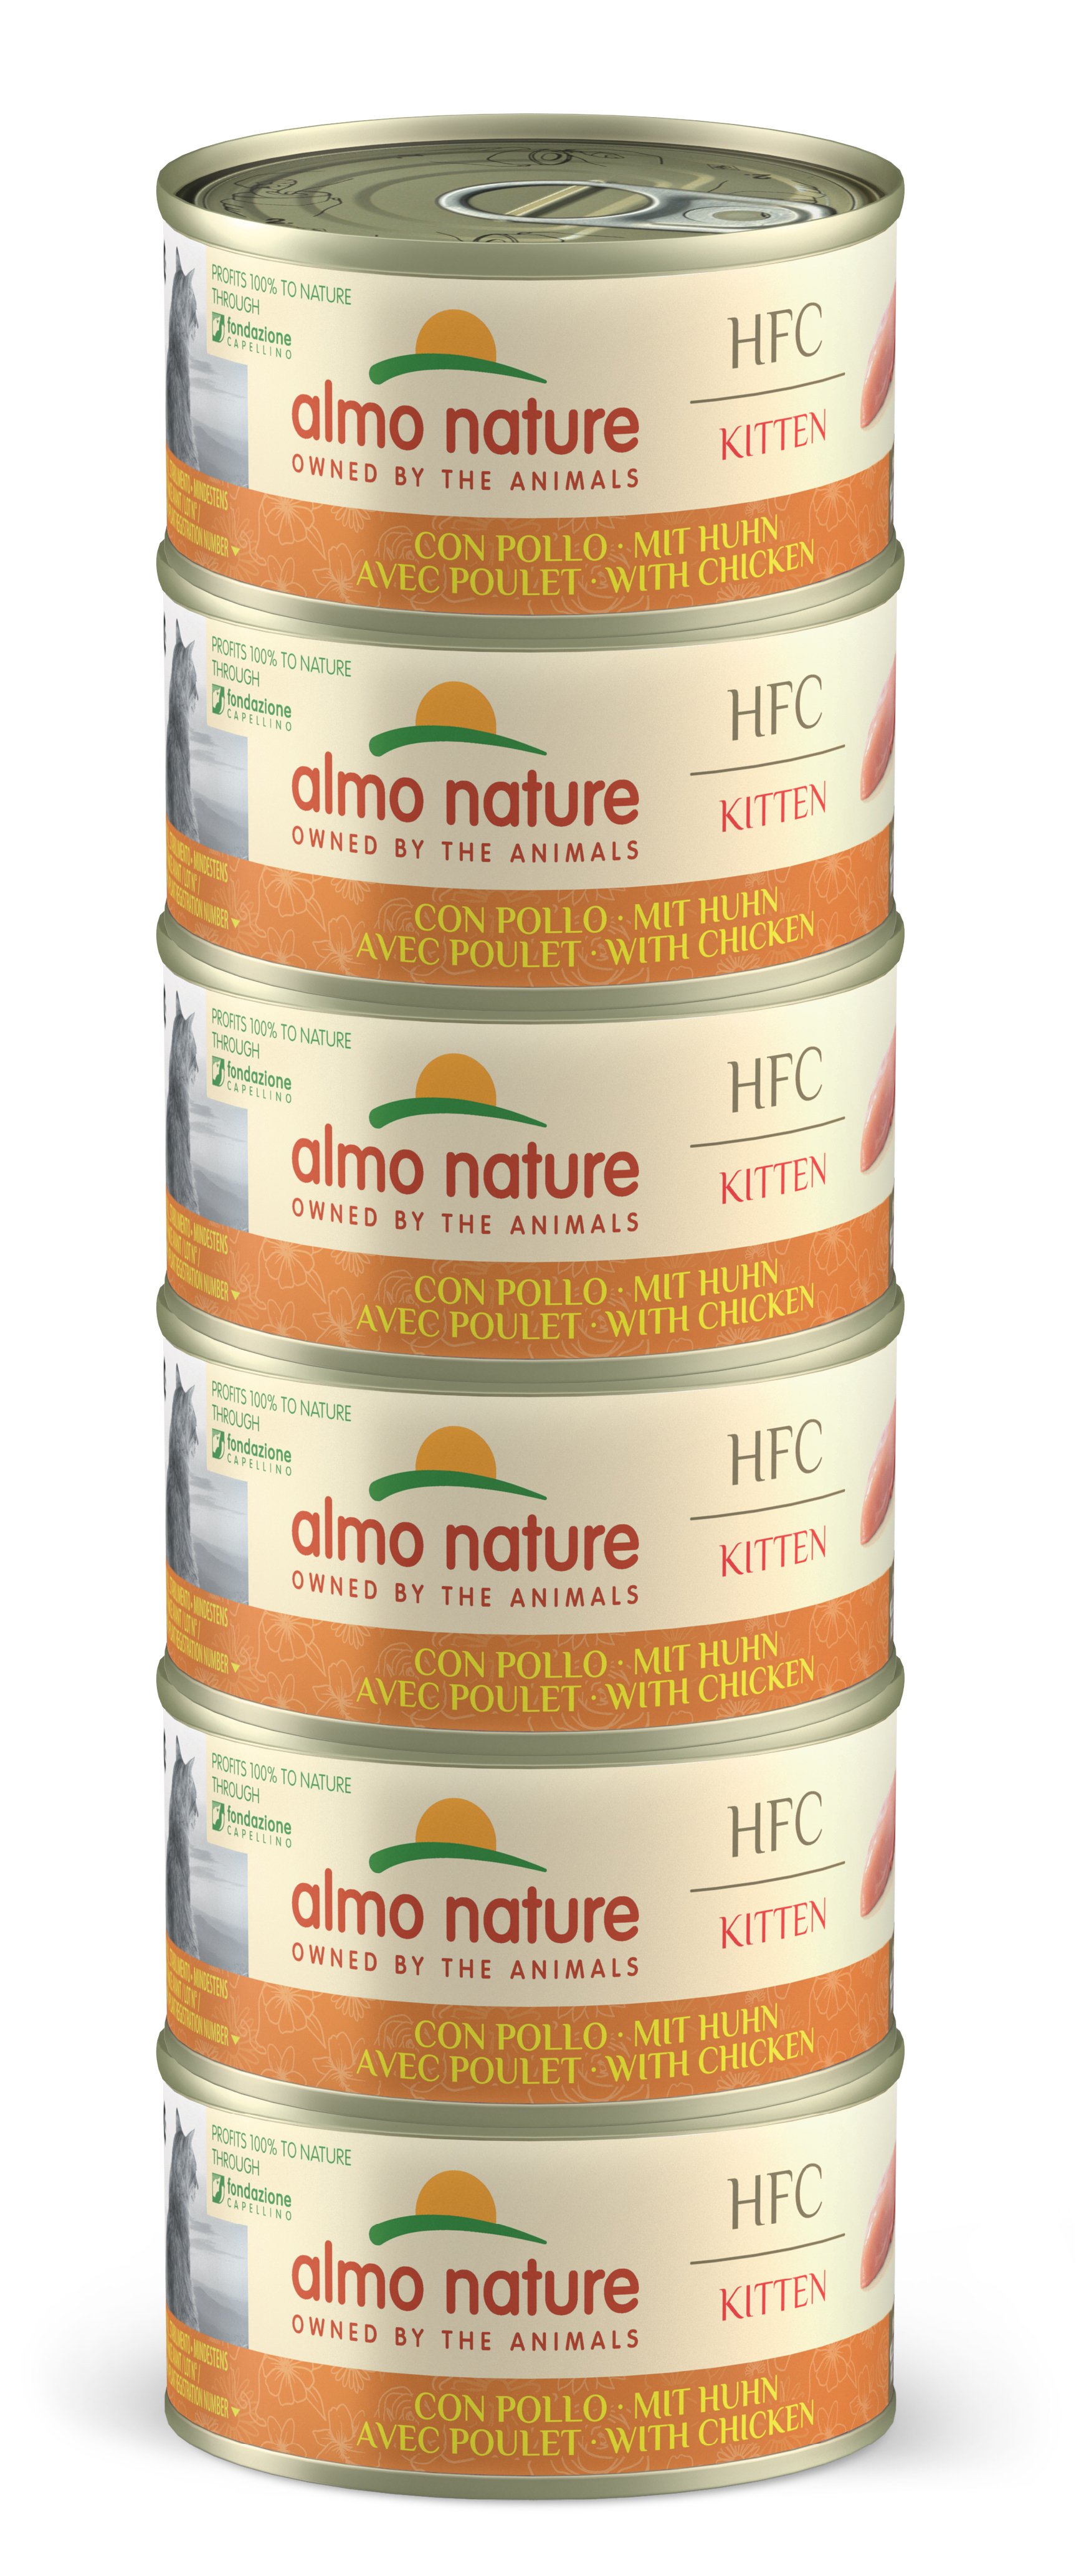 ALMO NATURE Multipack HFC Kitten pour chaton 6x70g